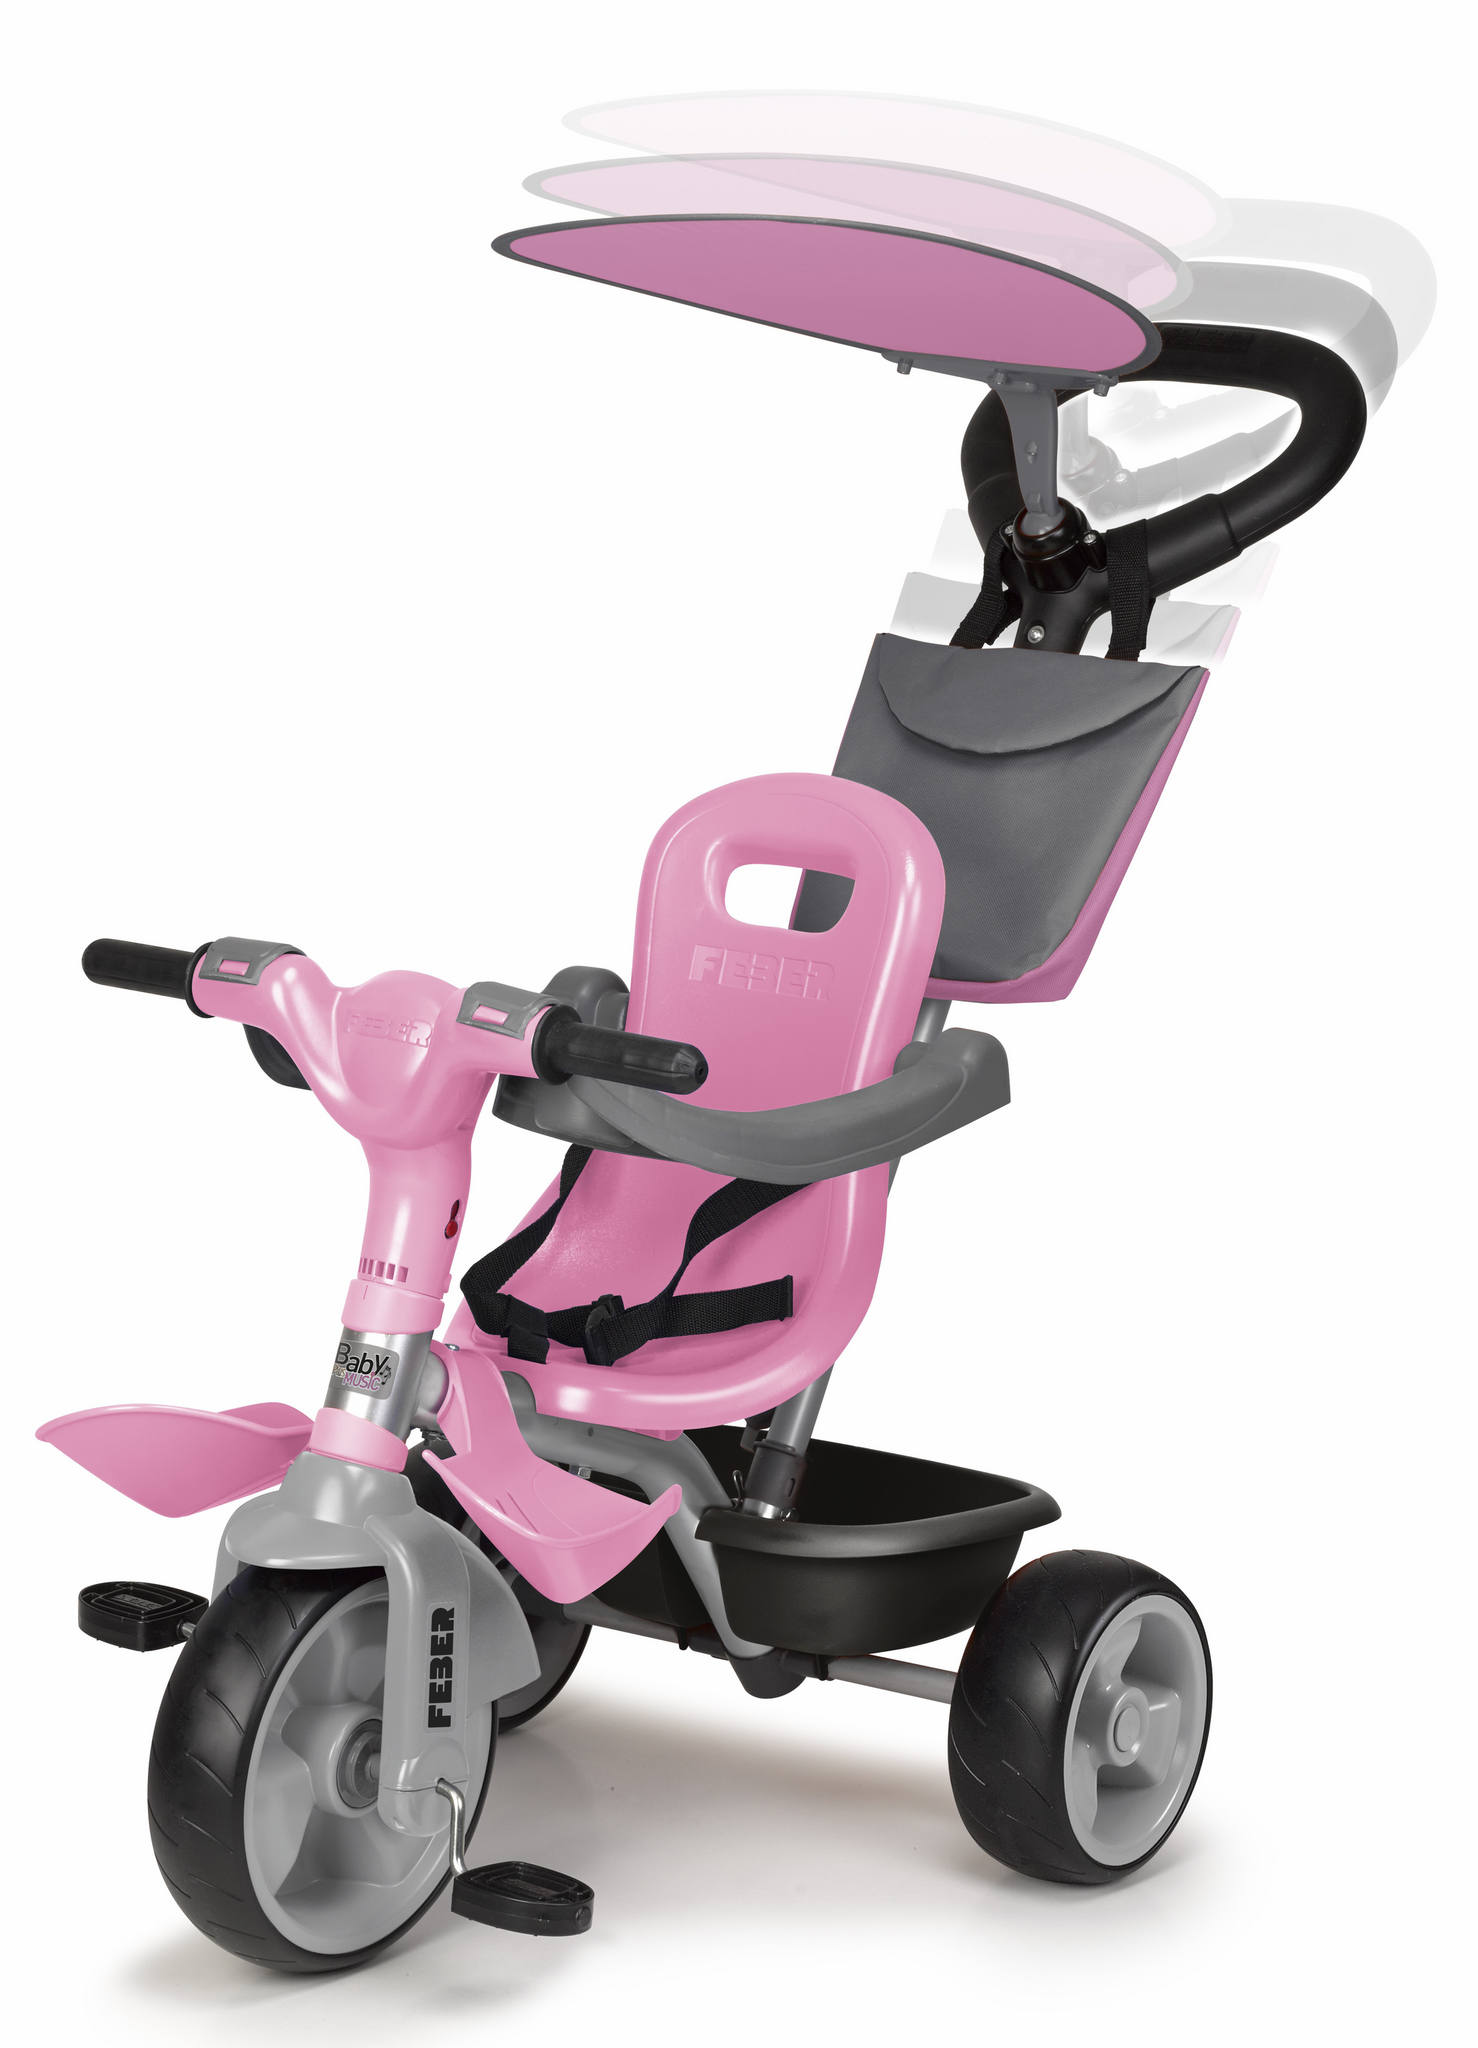 TRICICLO BABY PLUS MUSIC/PINK 12132 - N66722